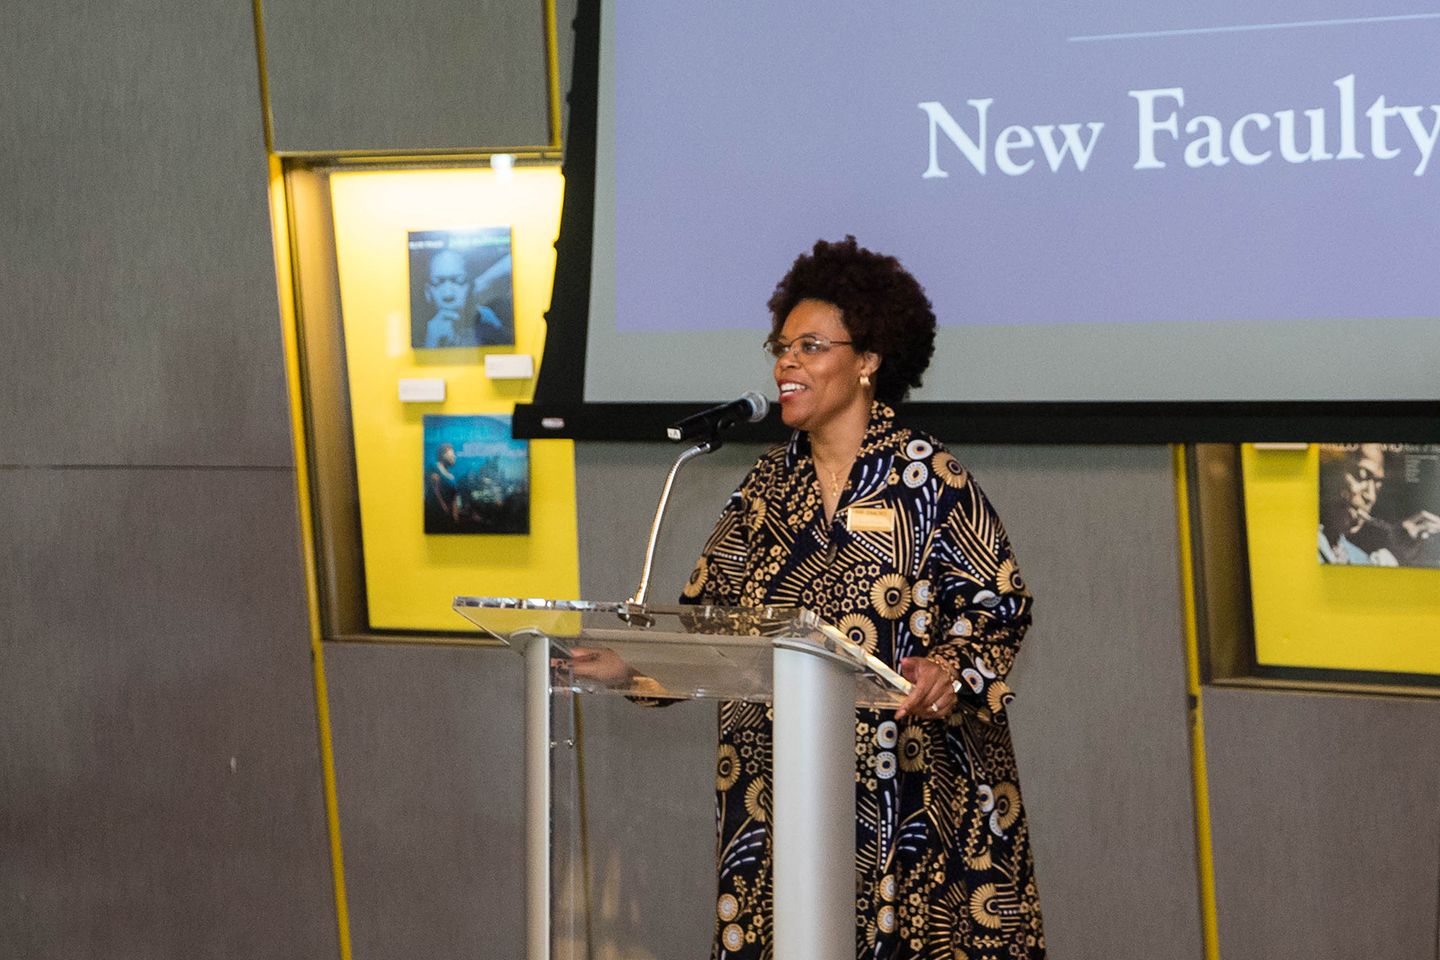 Pearl Dowe, Vice Provost for Faculty Affairs, speaks to new faculty